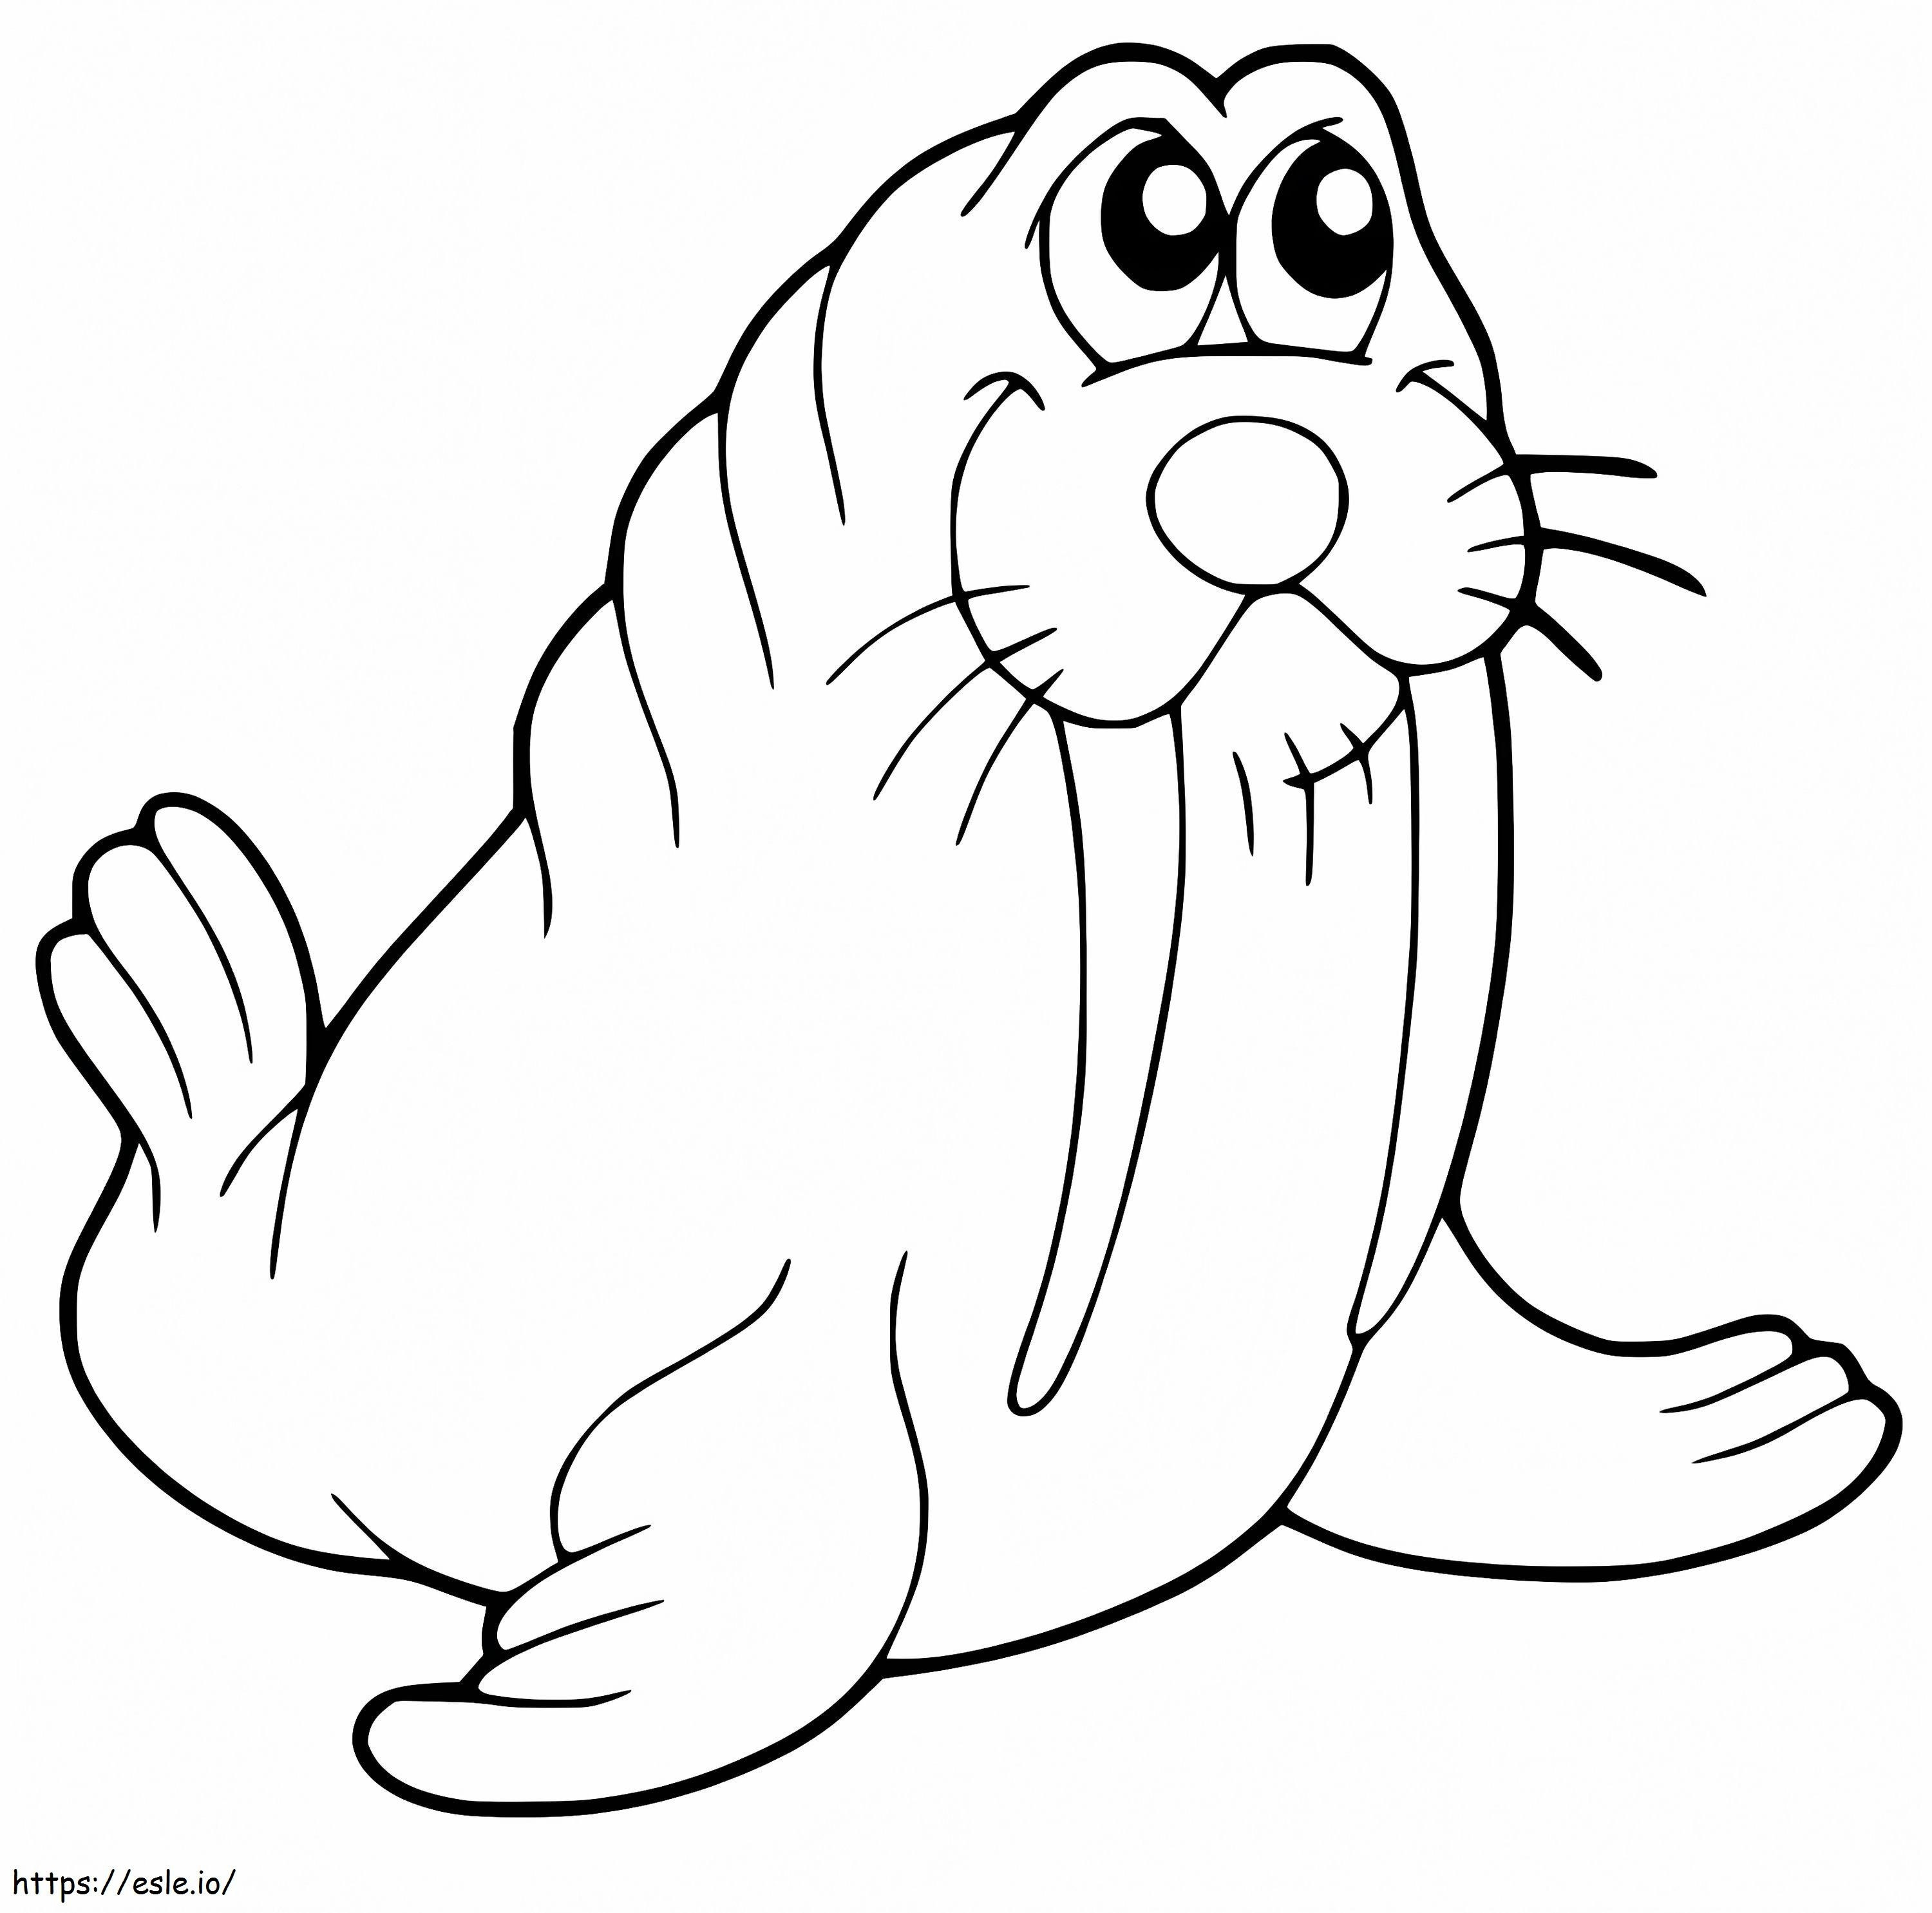 Walrus 18 coloring page